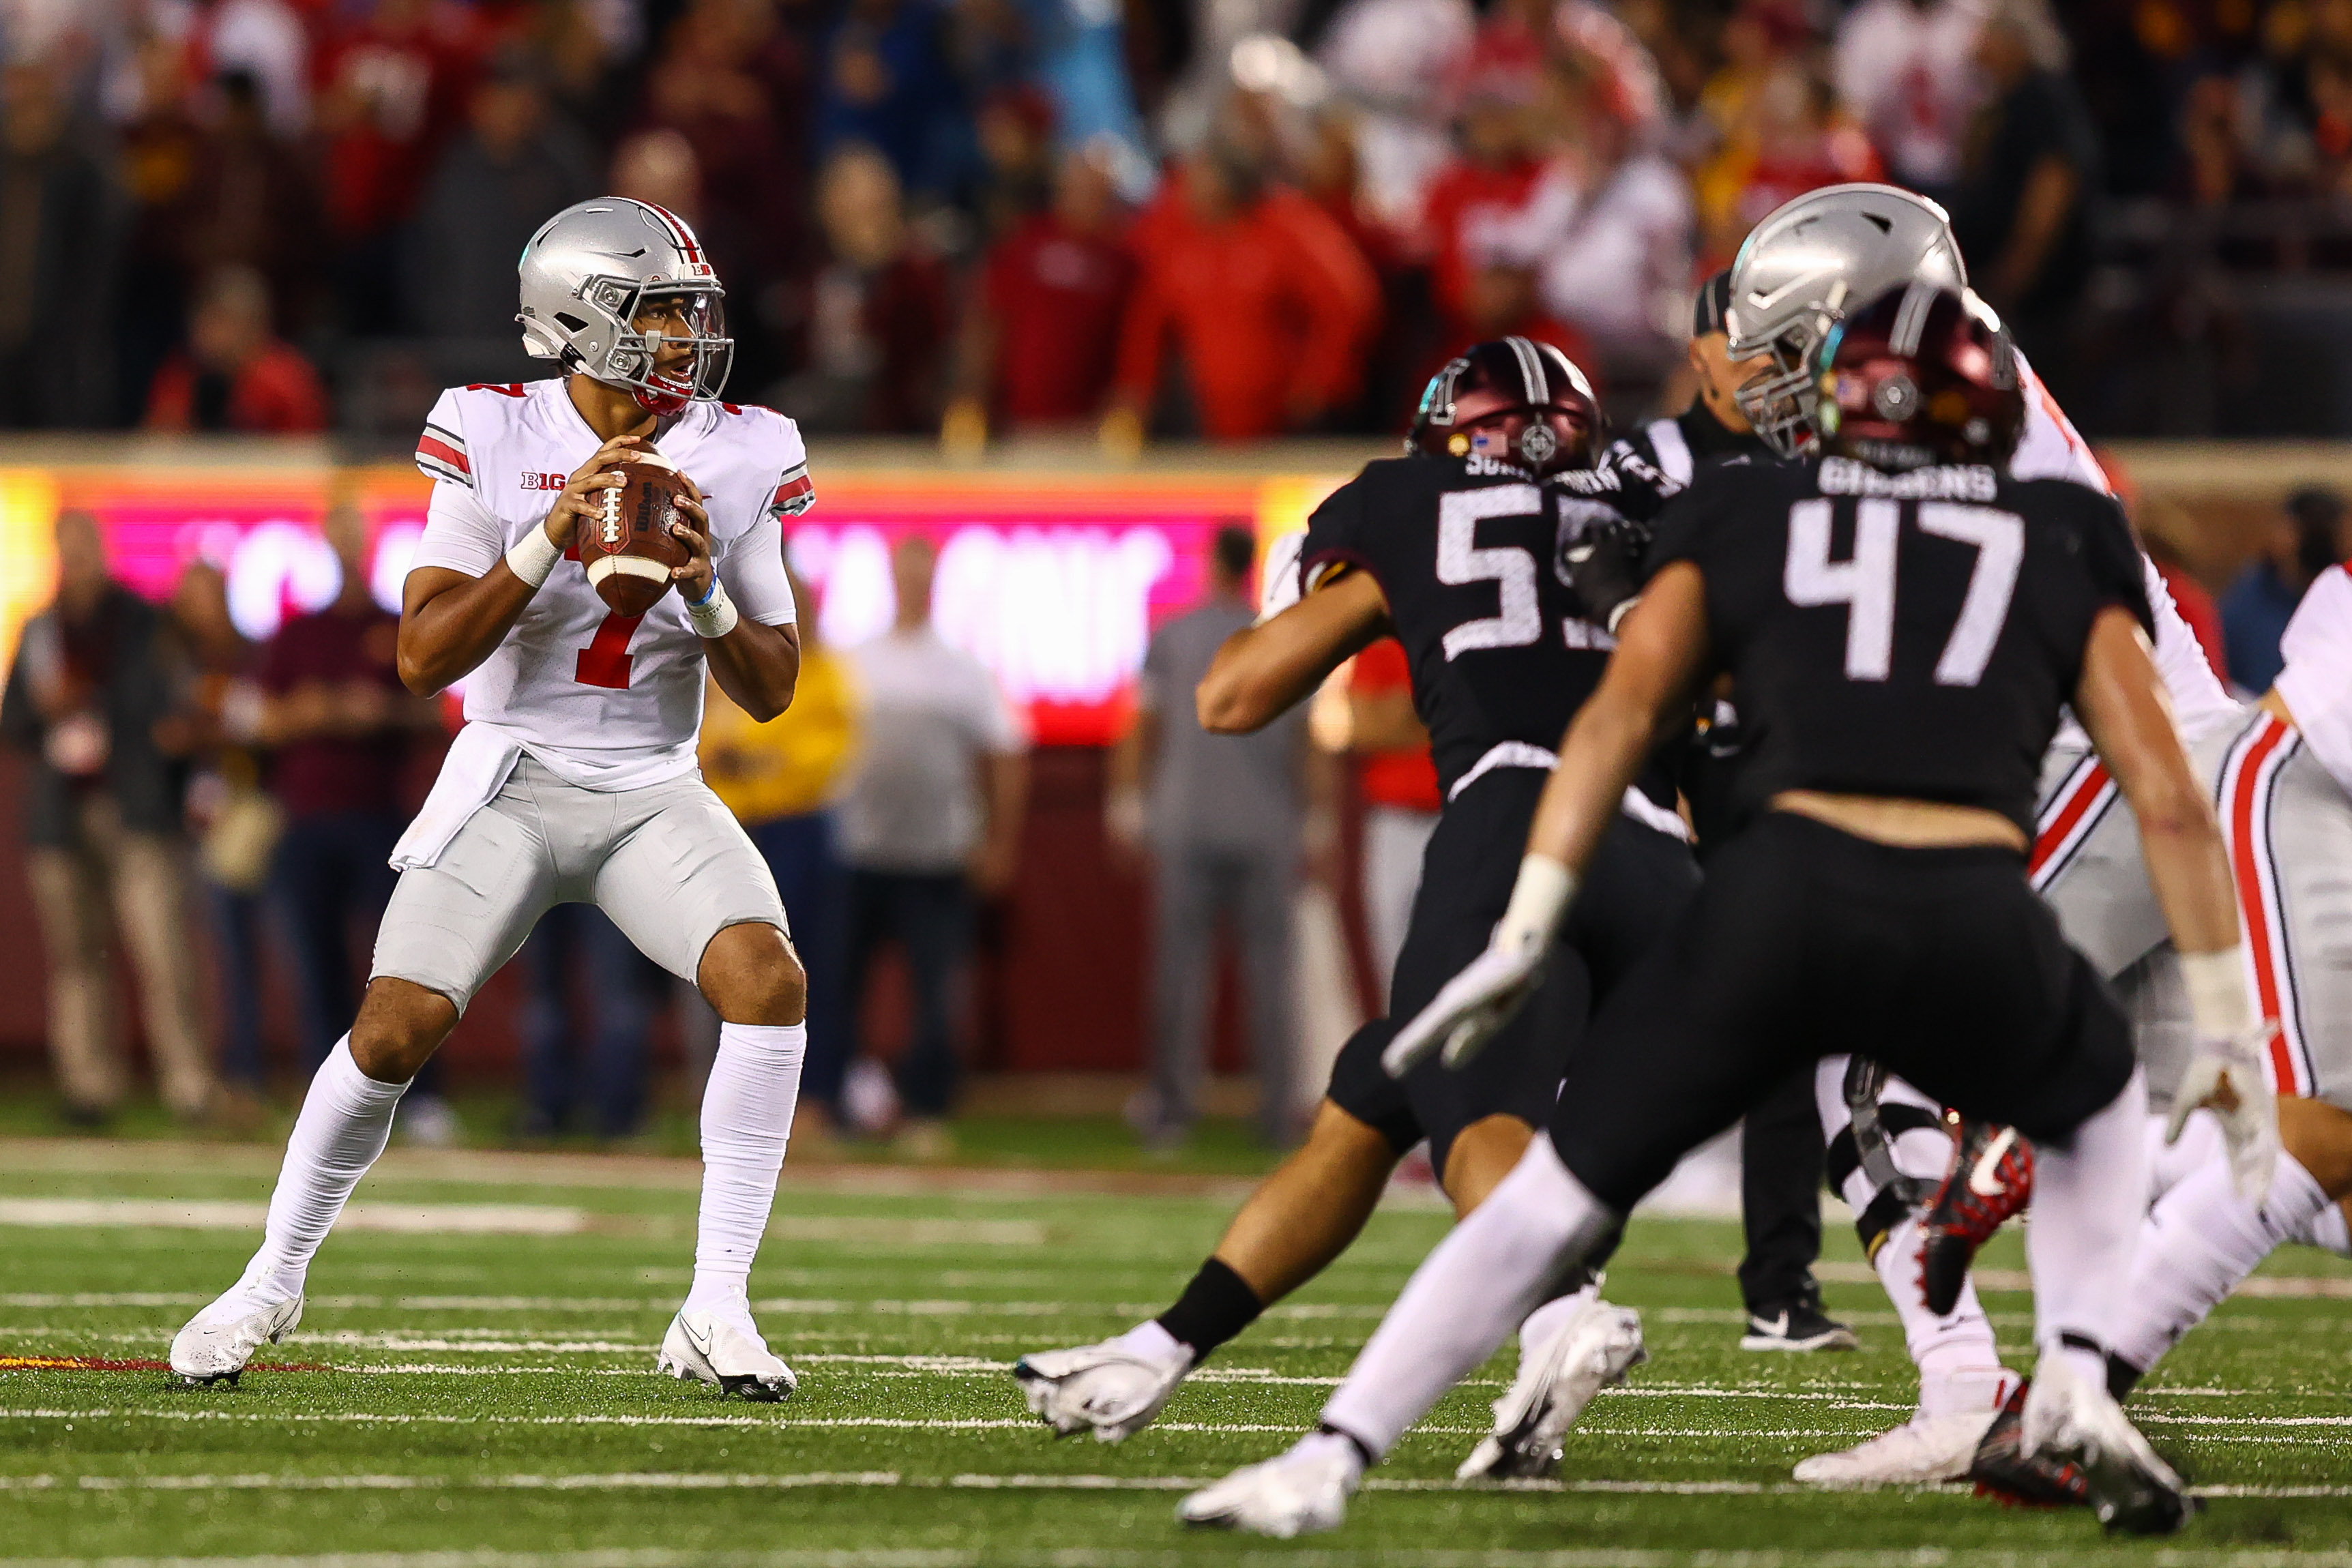 Top 25 roundup No. 4 Ohio State rallies for win at Minnesota Reuters